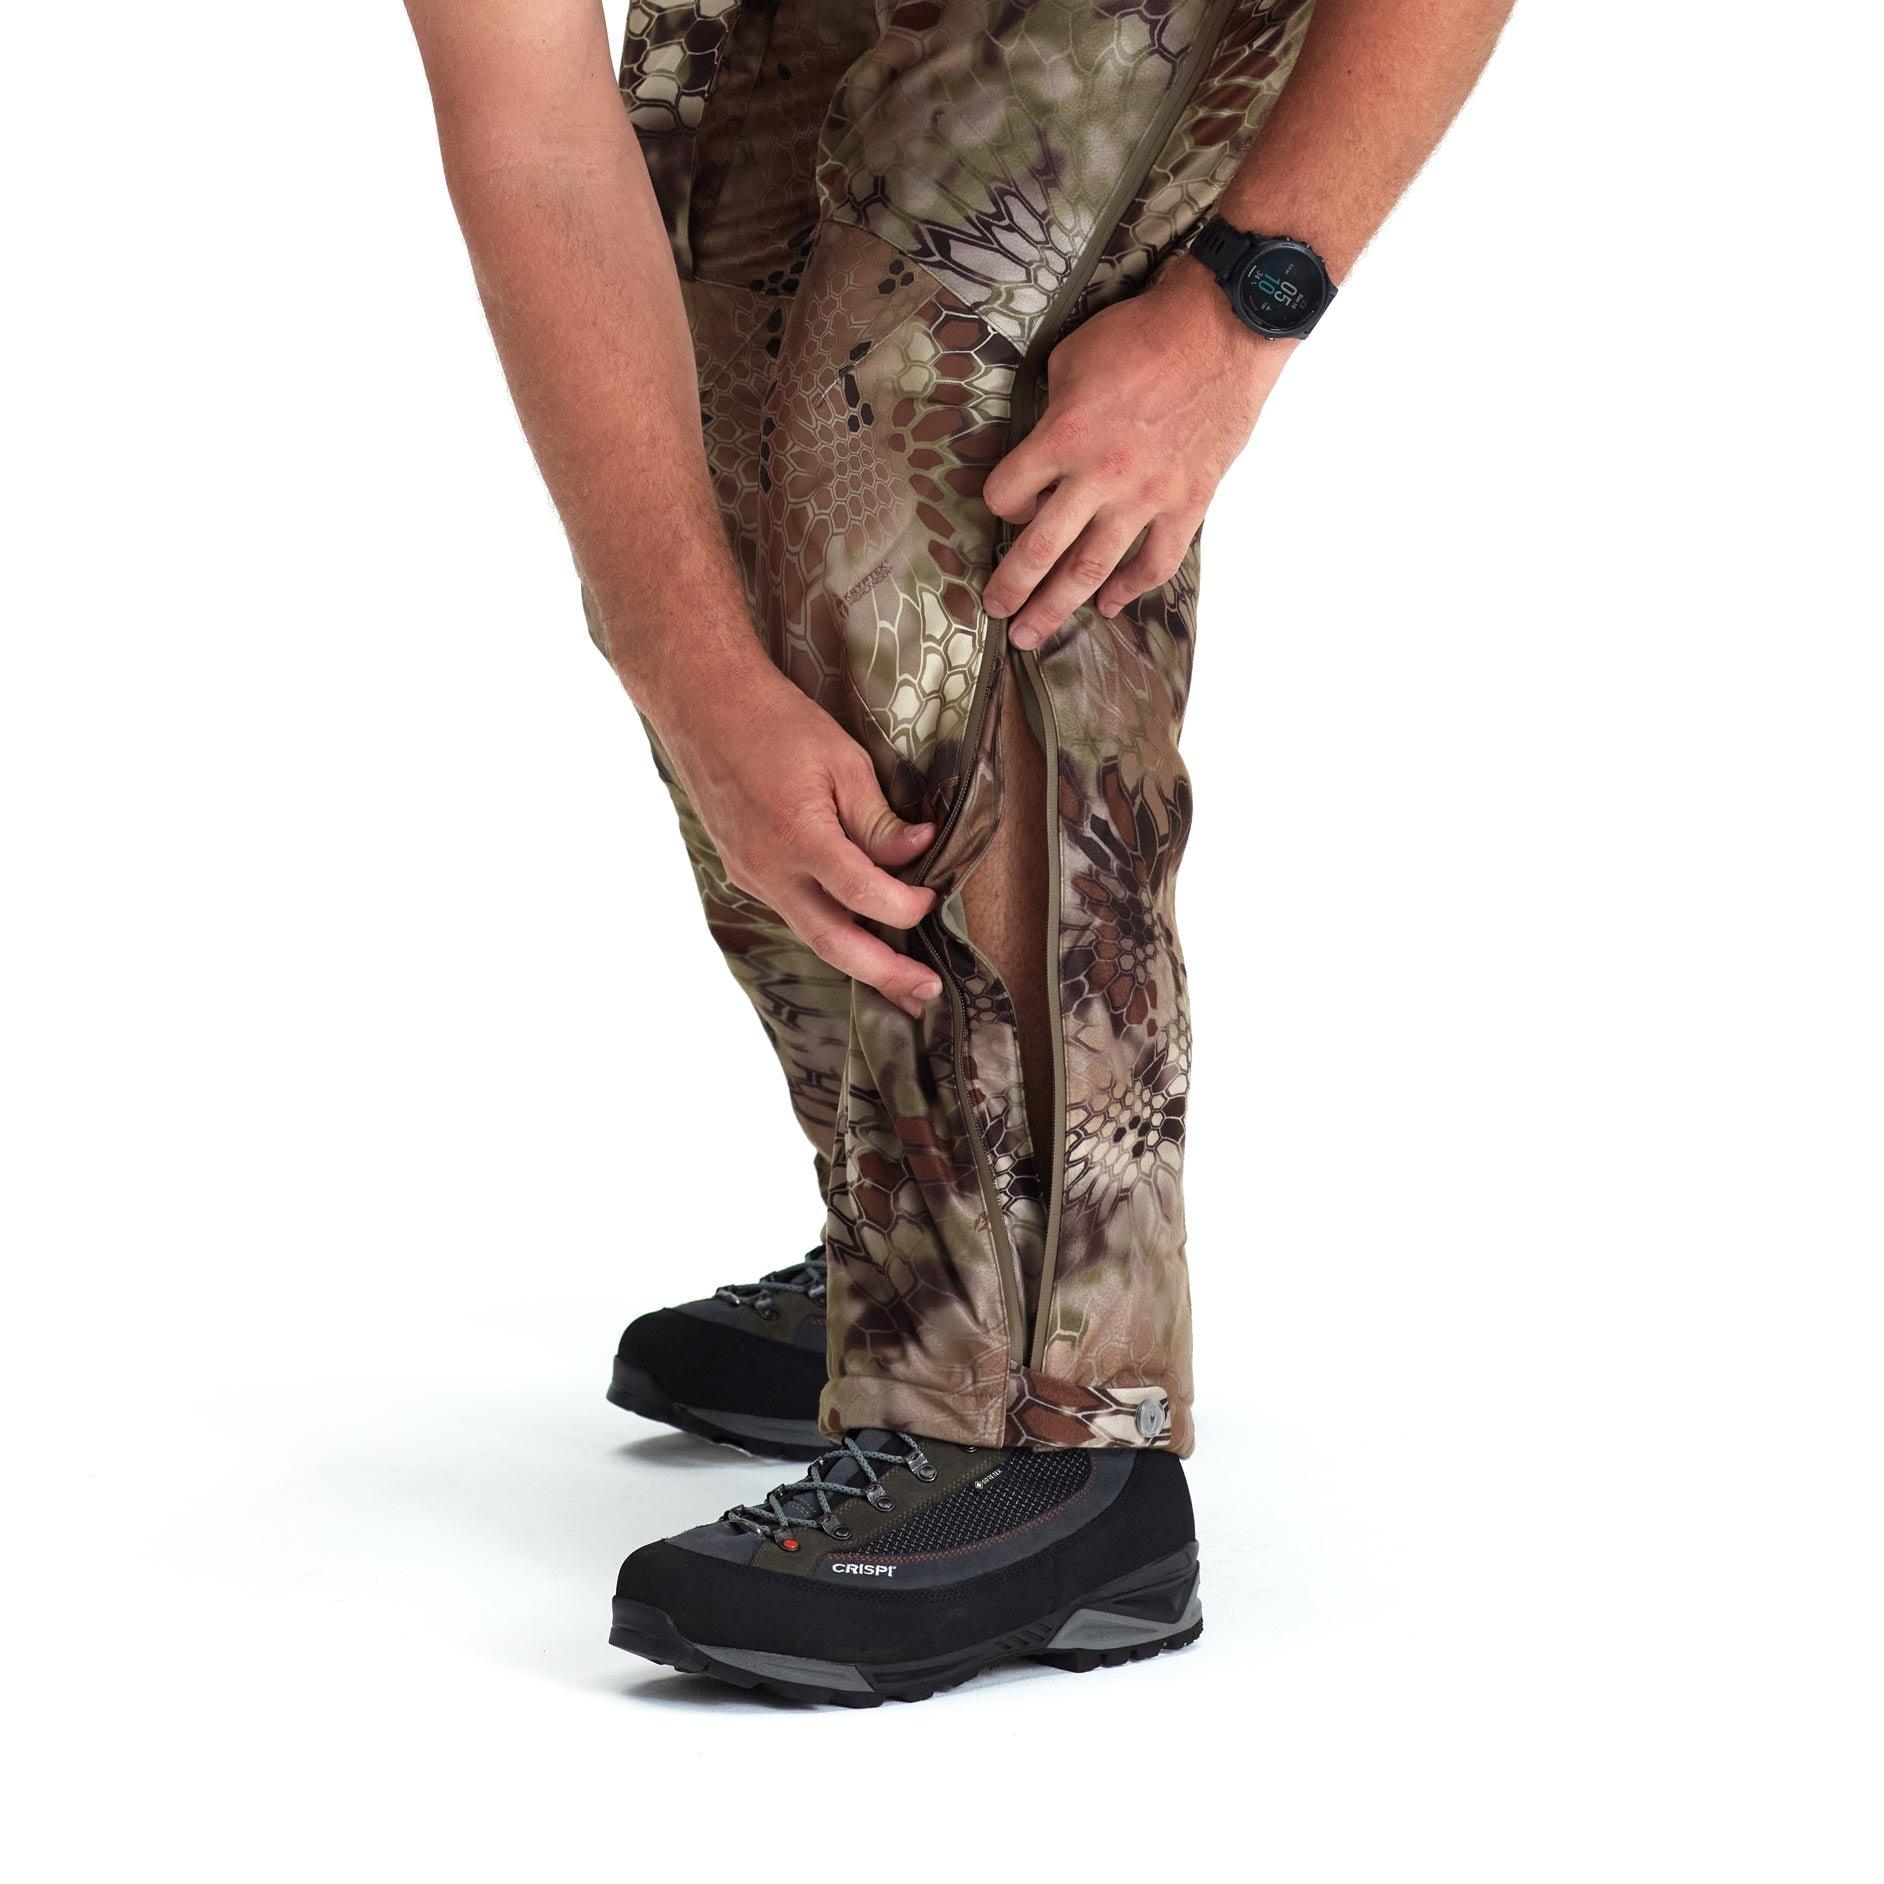 Guide Gear Men's Dry Waterproof Hunting Coveralls with Hood, Insulated Camo Hunt Overalls